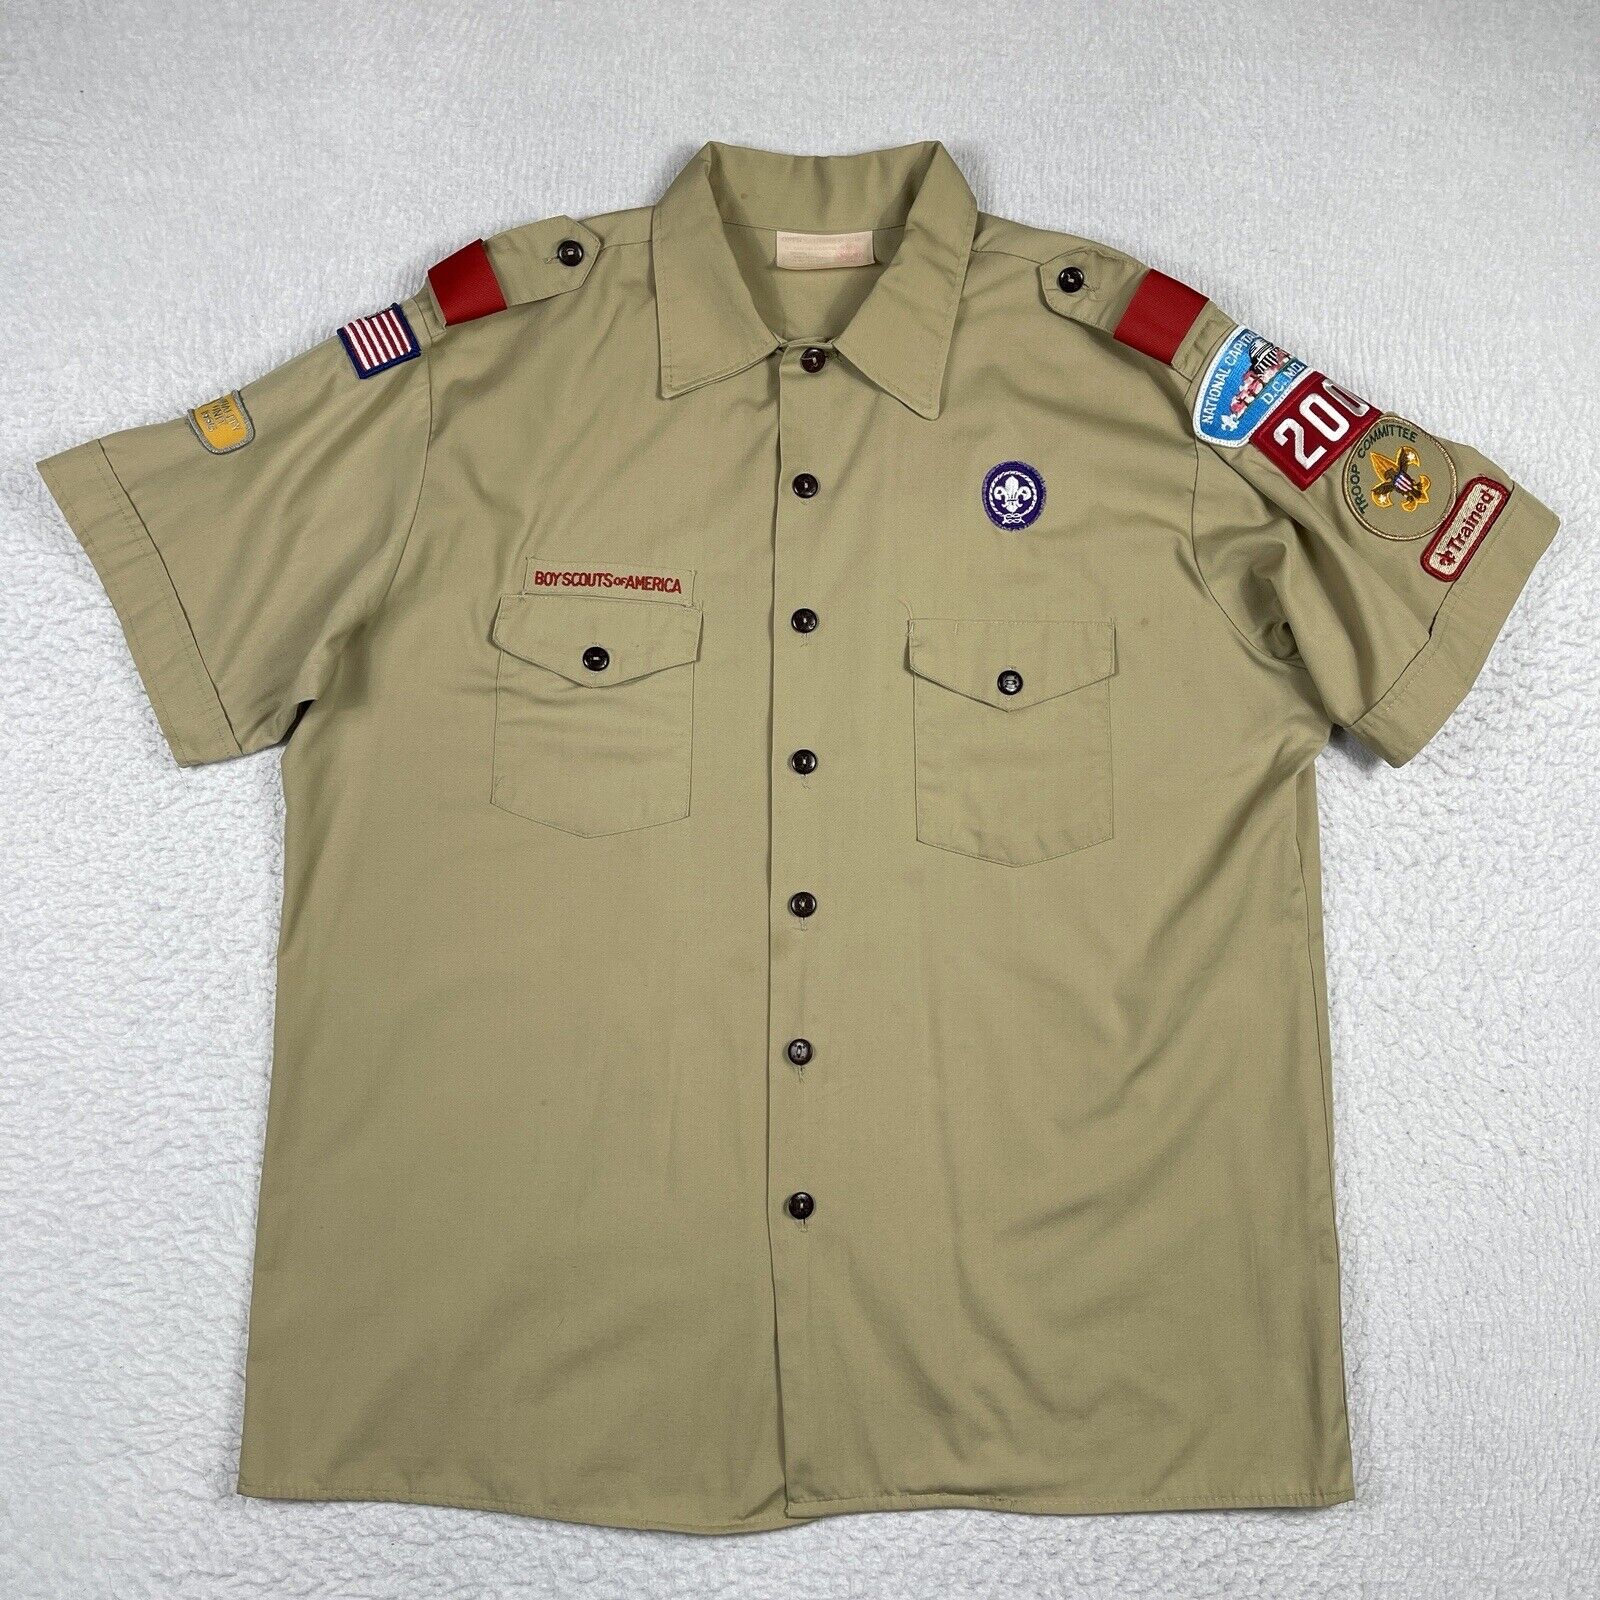 Boy Scouts Of America Shirt Mens XL Beige Vintage Made In USA Scouting DMV